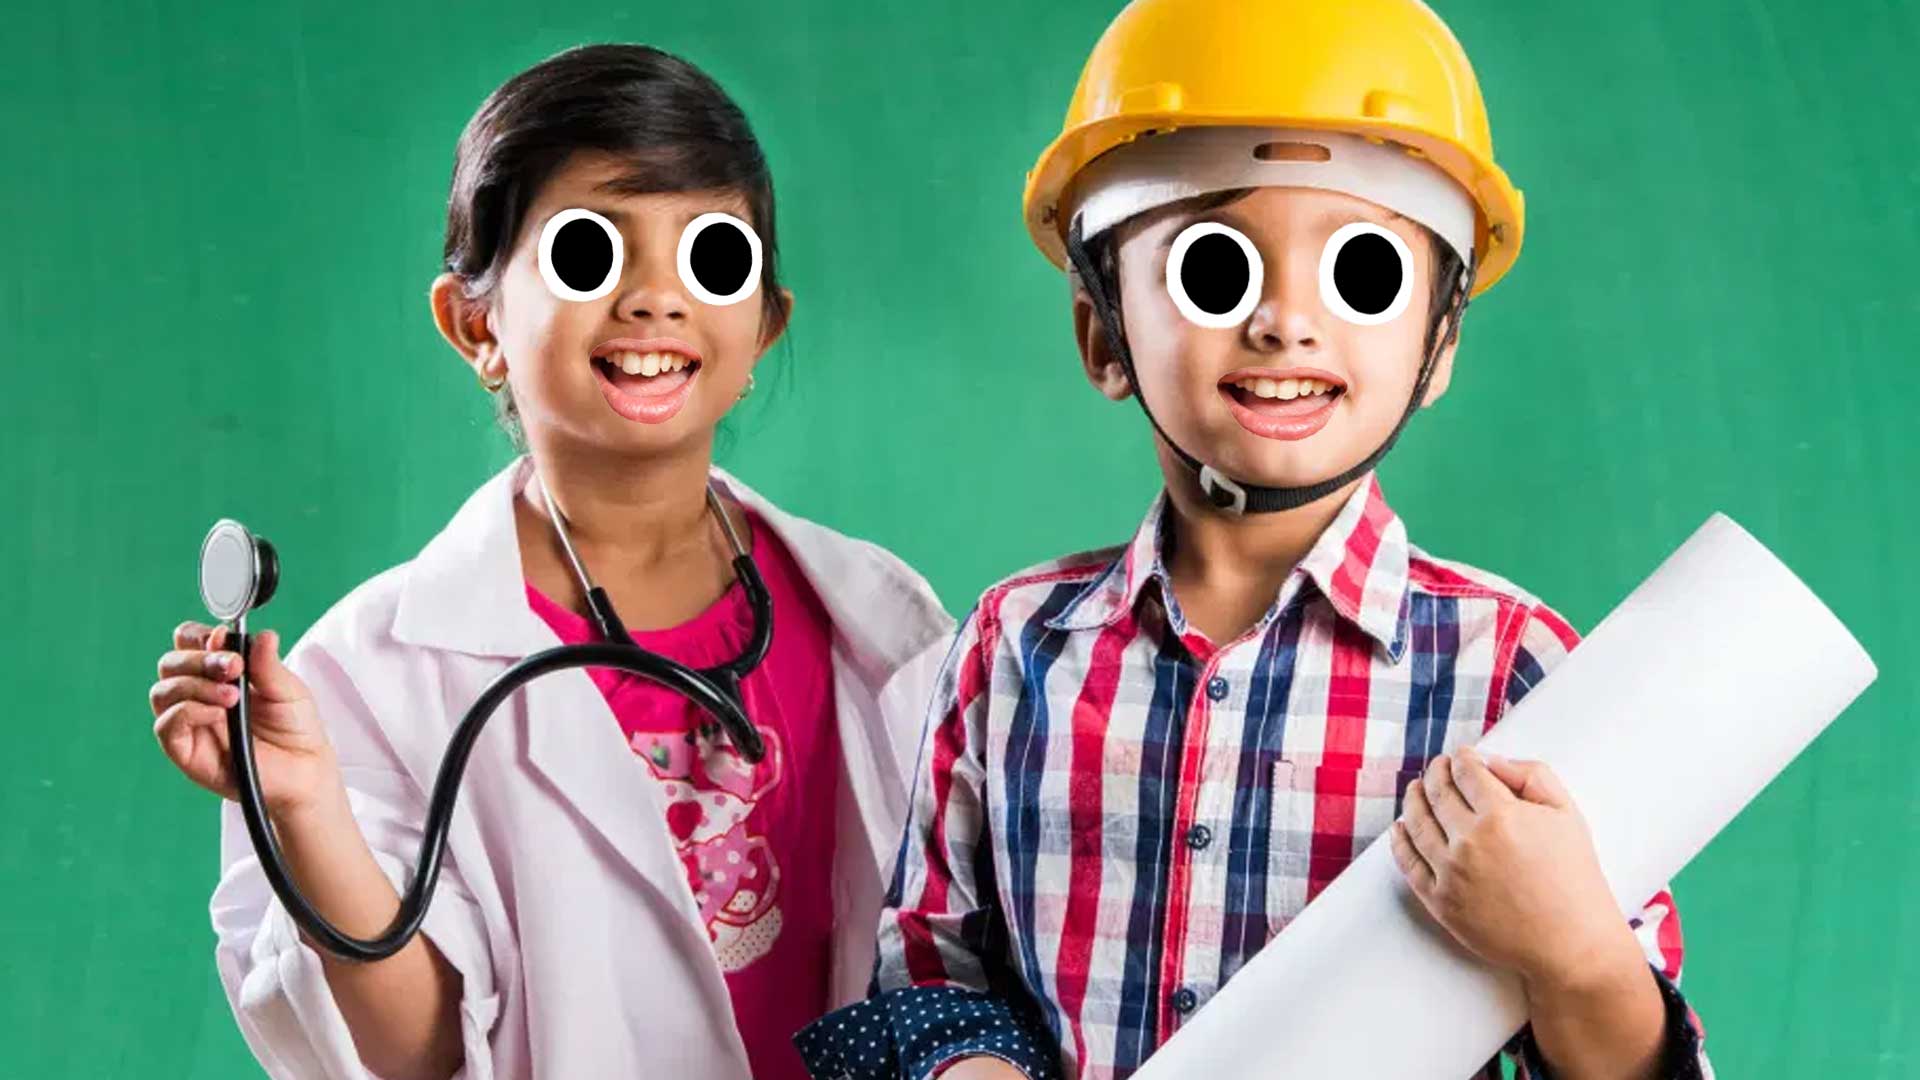 Two children dressed as a doctor and construction worker